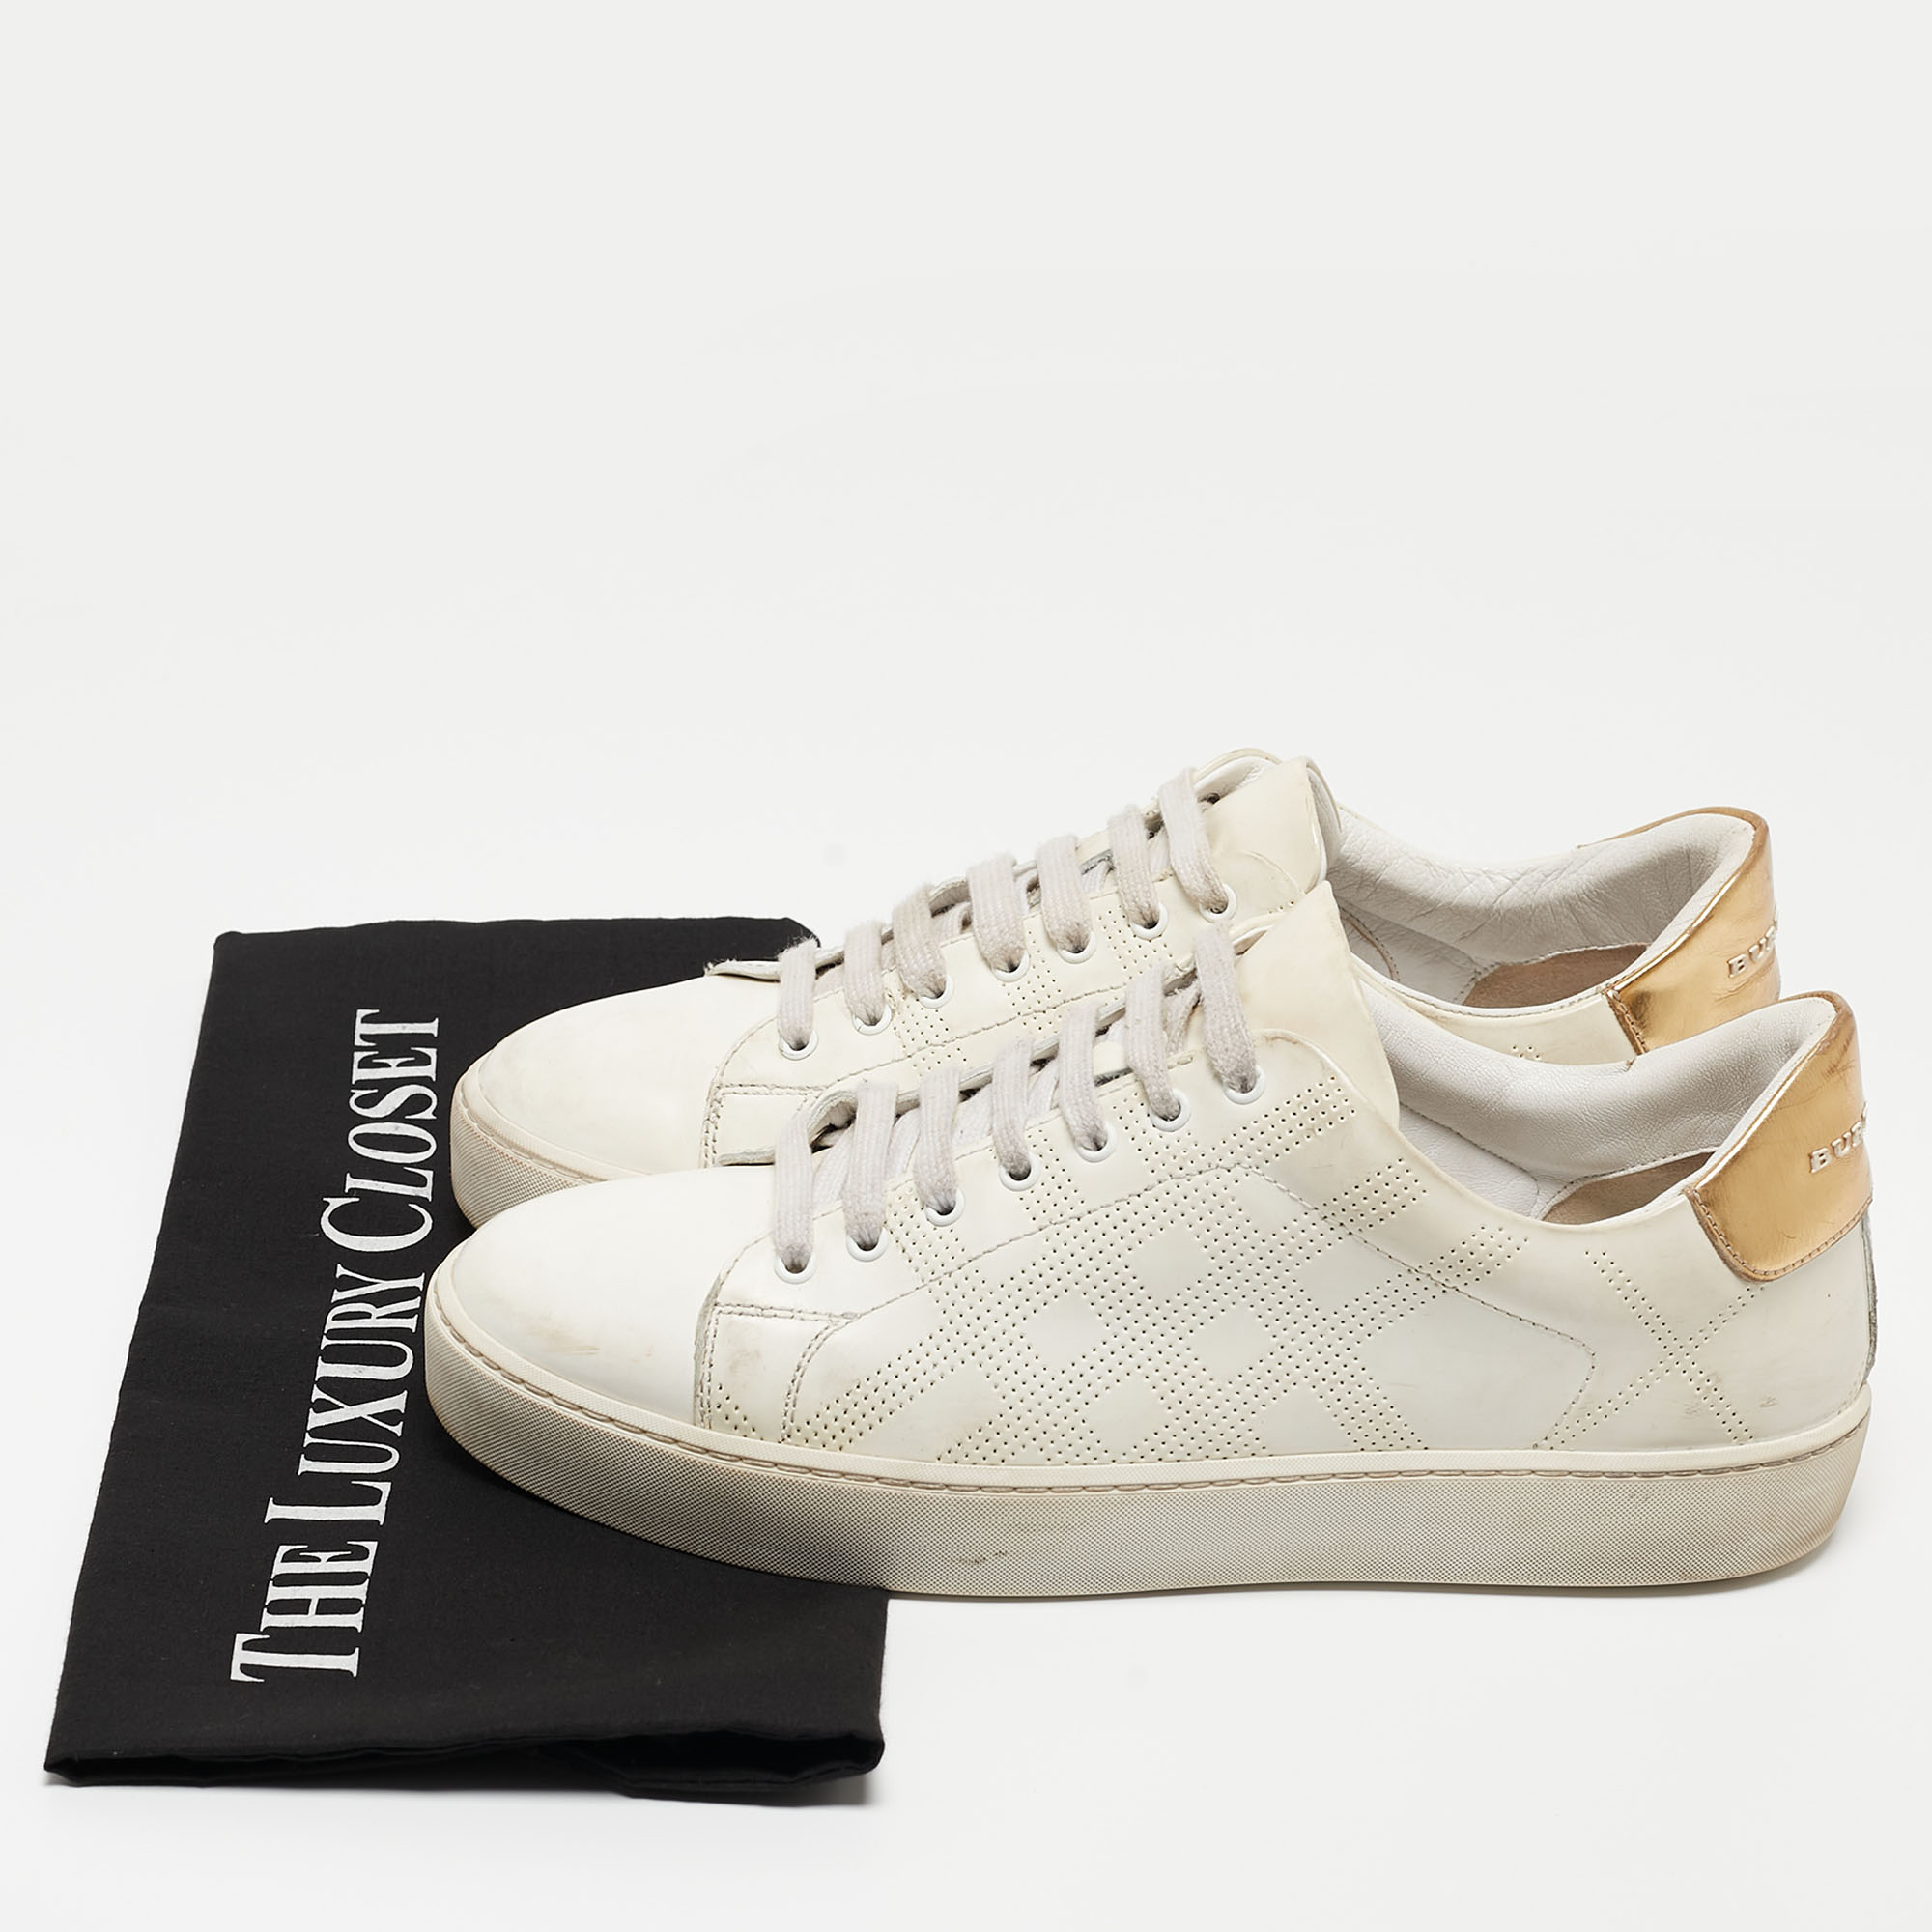 Burberry White/Gold Perforated Leather Westford Sneakers Size 38.5